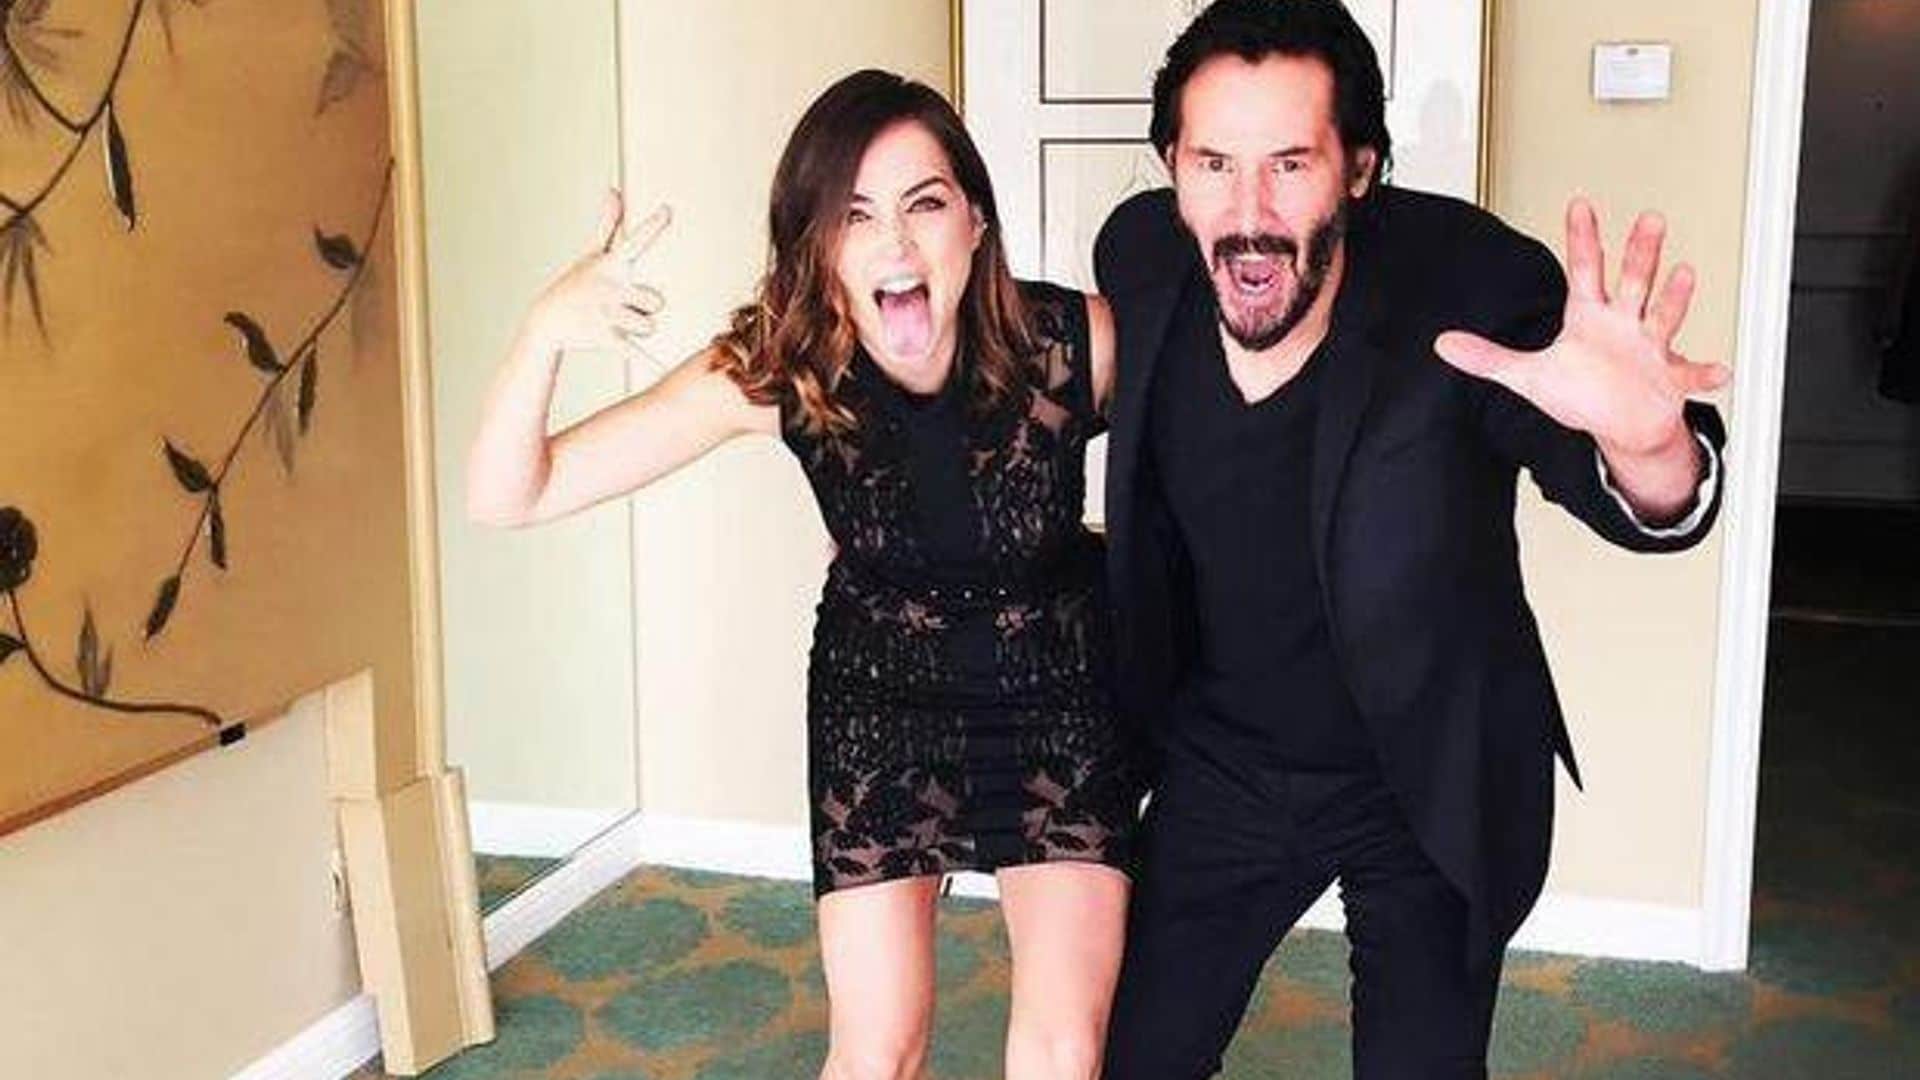 Keanu Reeves and co-star Ana de Armas have fun in Instagram snaps